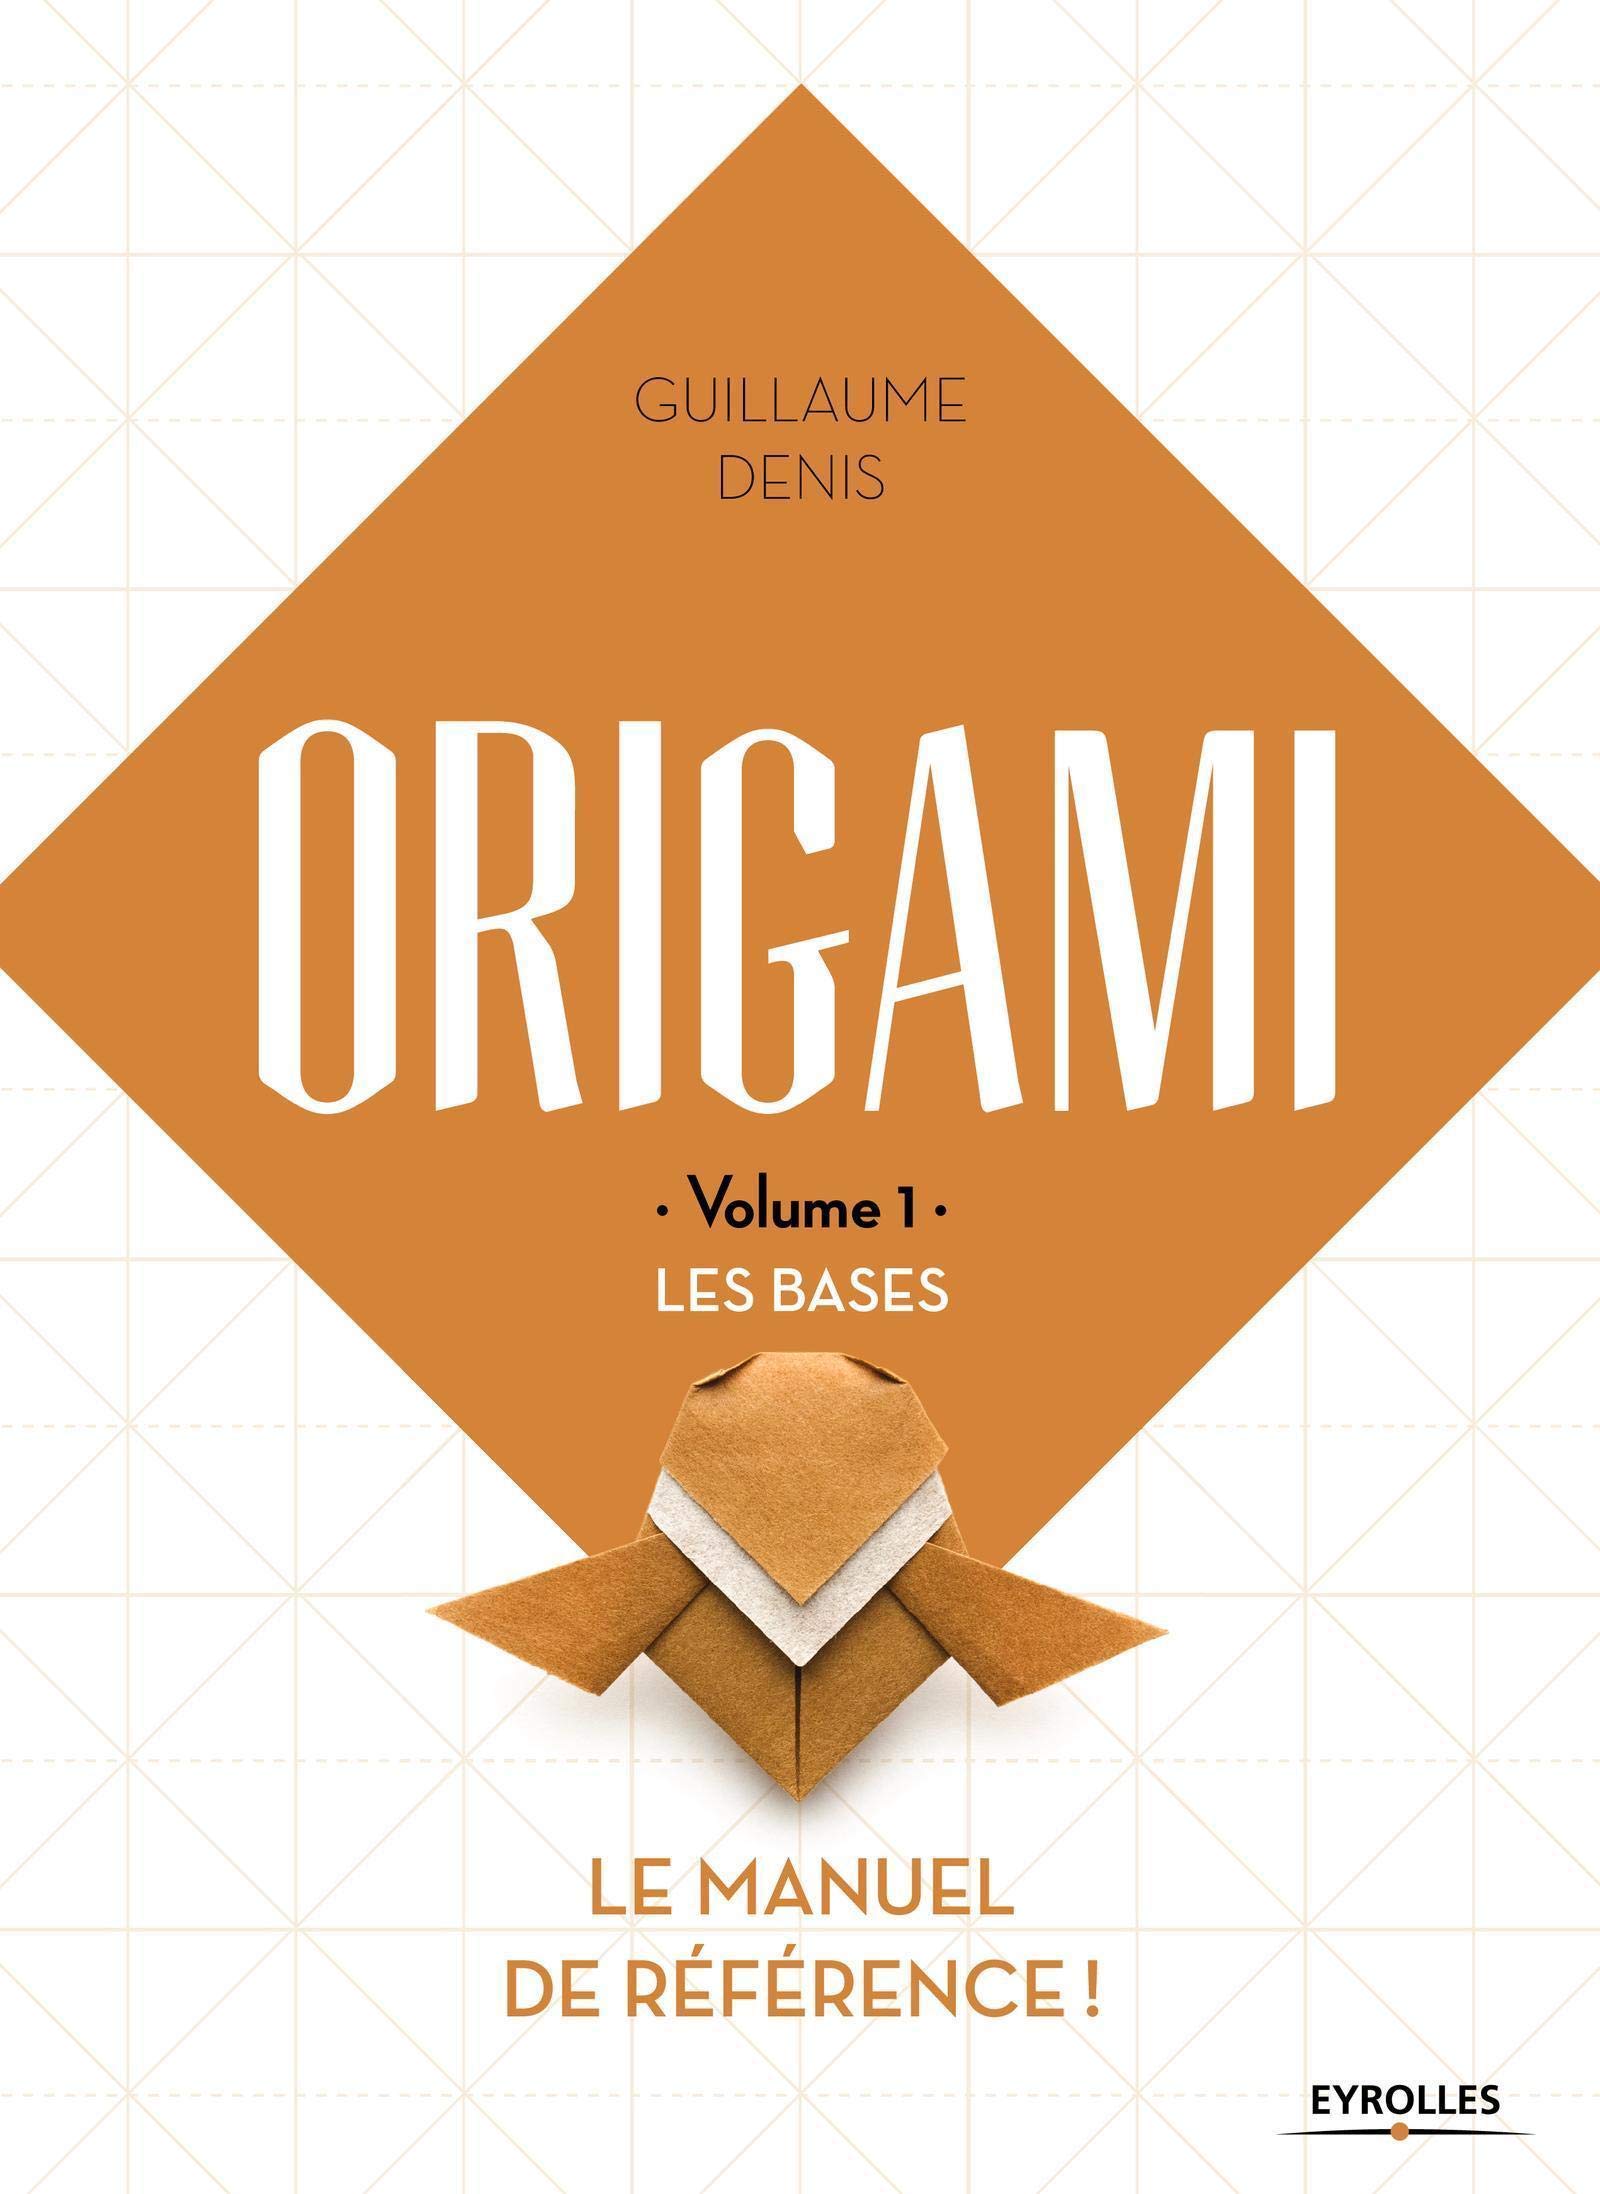 ORIGAMI - Volume 1 - LES BASES : page 157.